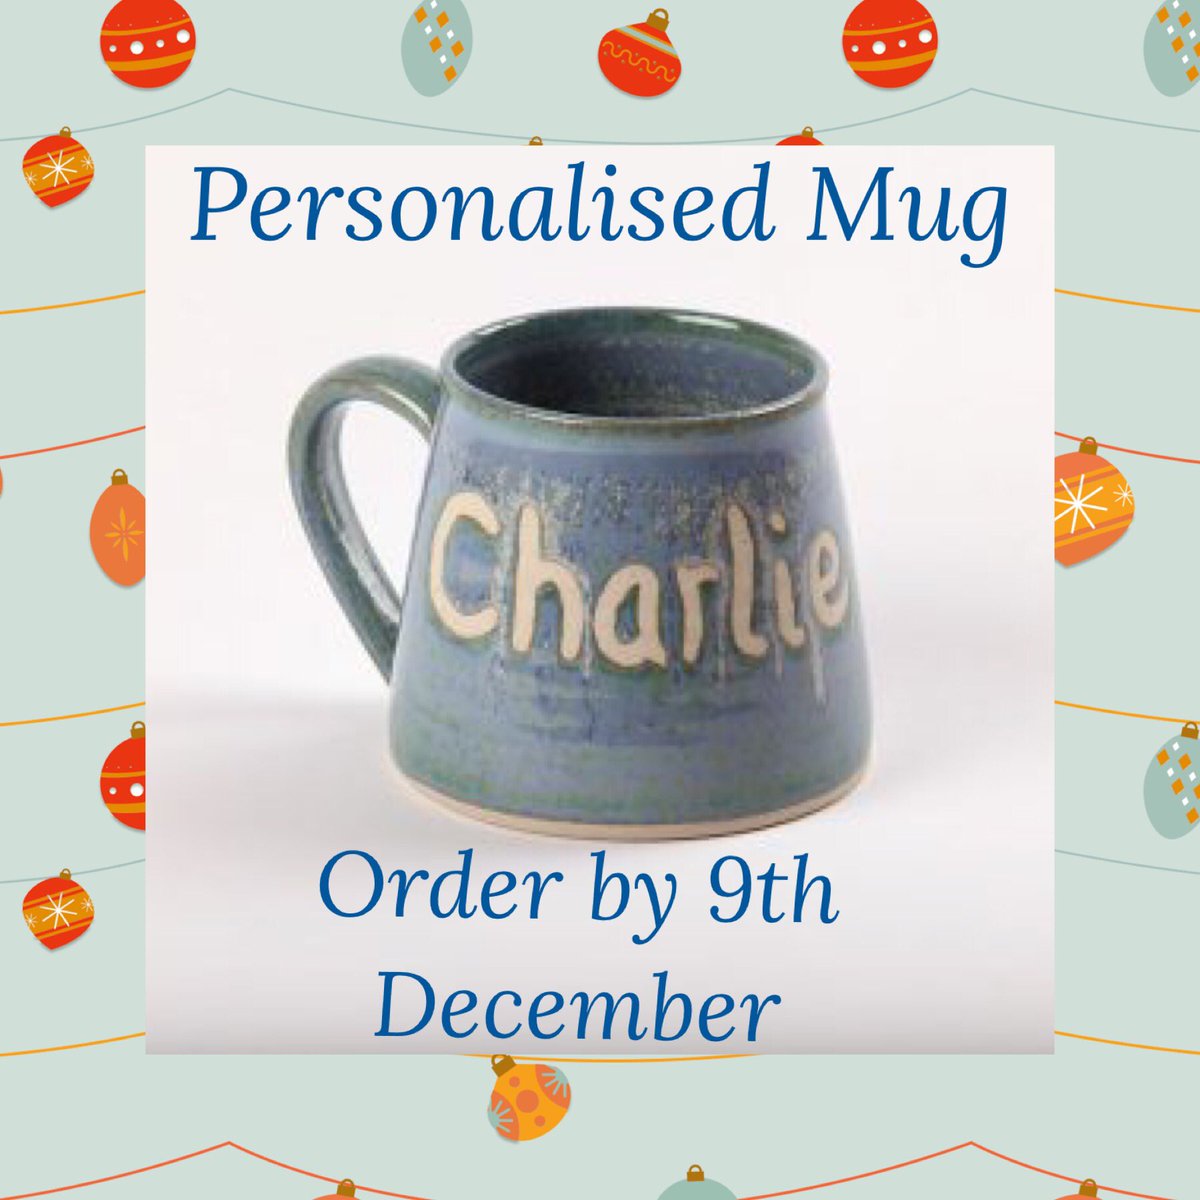 If you are planning on gifting a Personalised Mug this year, please make sure you order before 9th Dec. I often hear lovely feedback from recipients of these. Order link in the comments 🎁 #shoplocal #giveirishcraft #thoughtfulgift #handmadetoorder